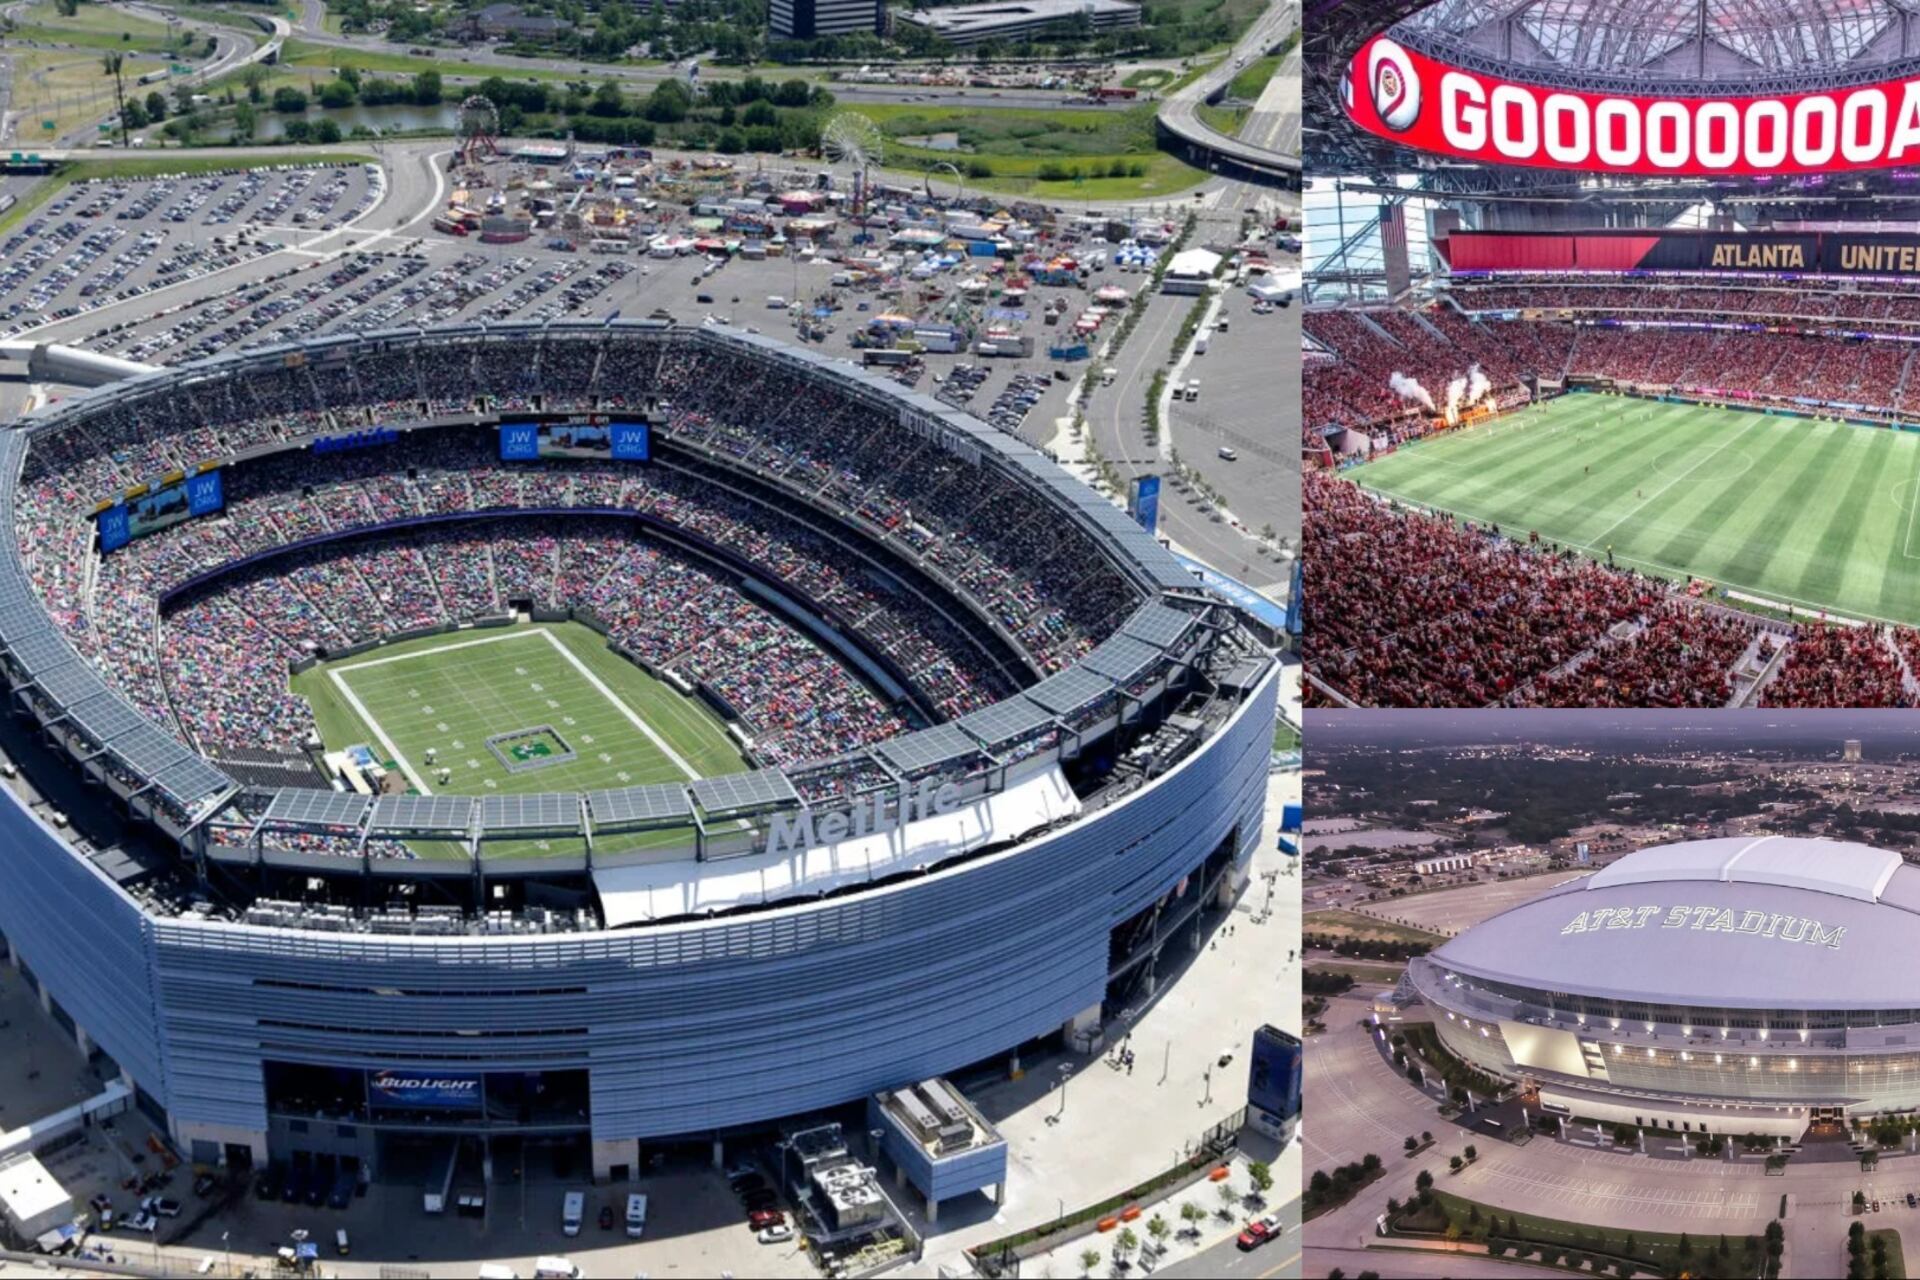 While Metlife Stadium has the World Cup Final, this stadium is valued more